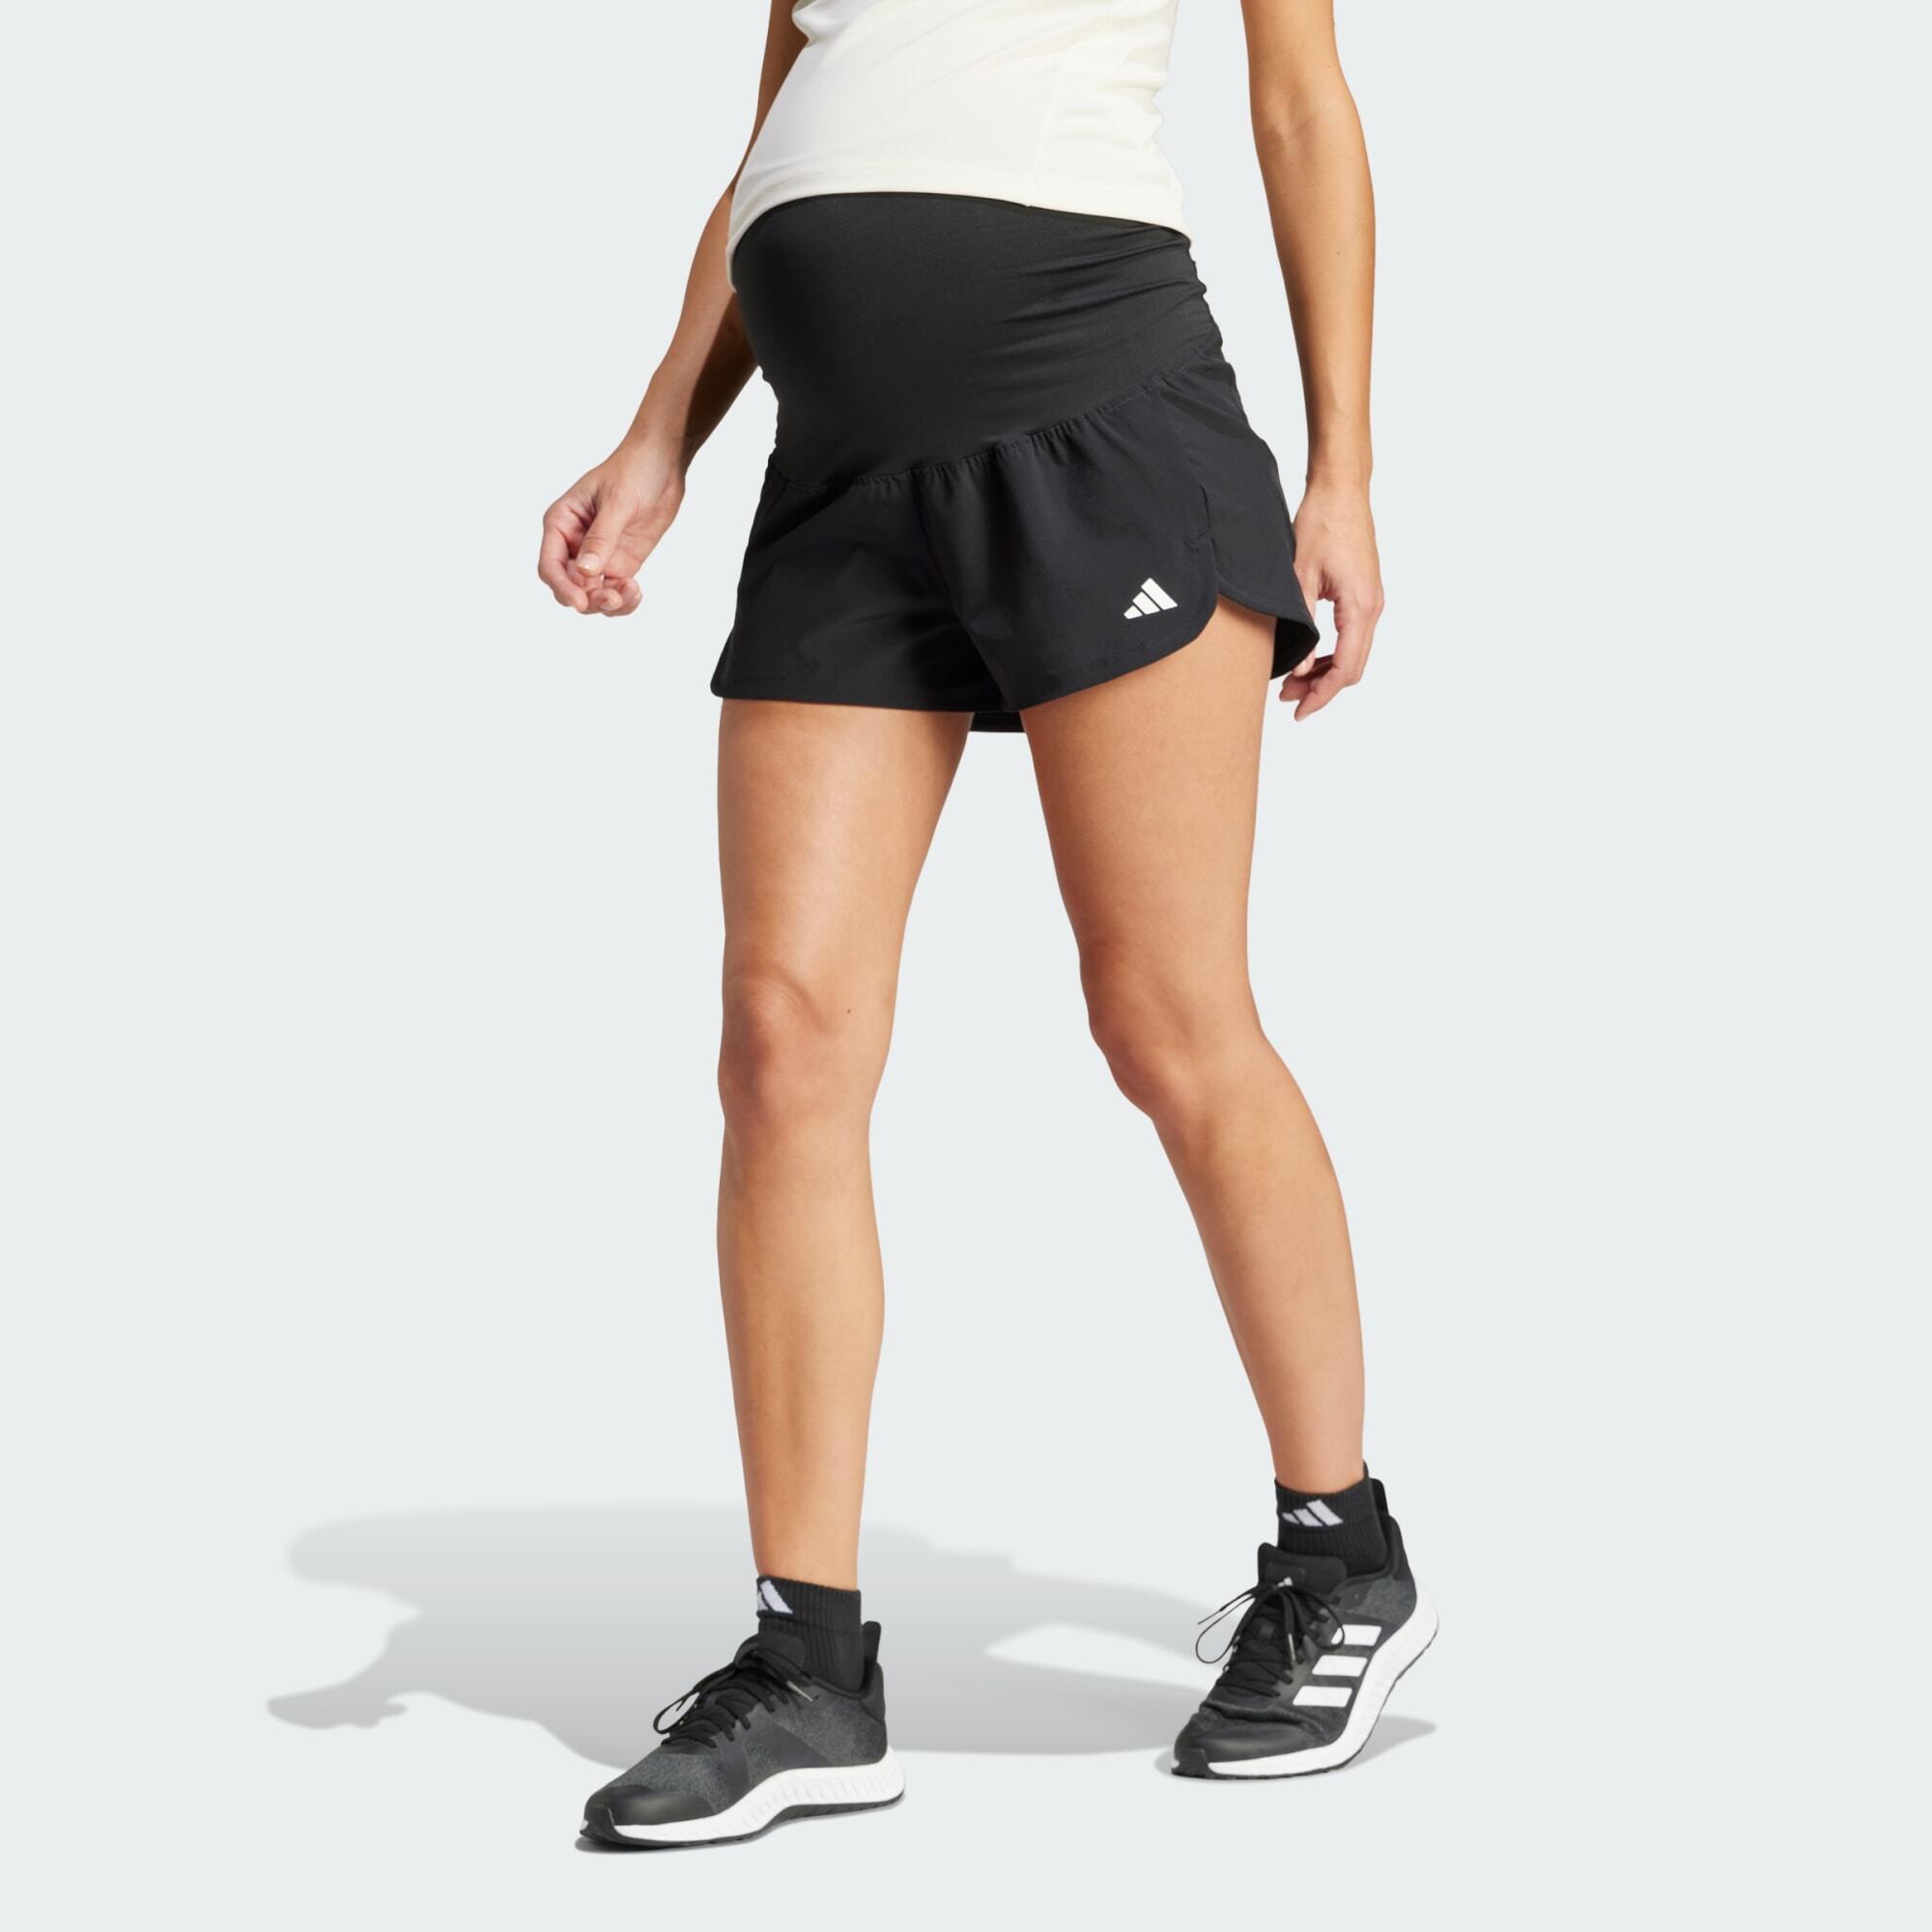 Pacer Woven Stretch Training Maternity Shorts 1/5